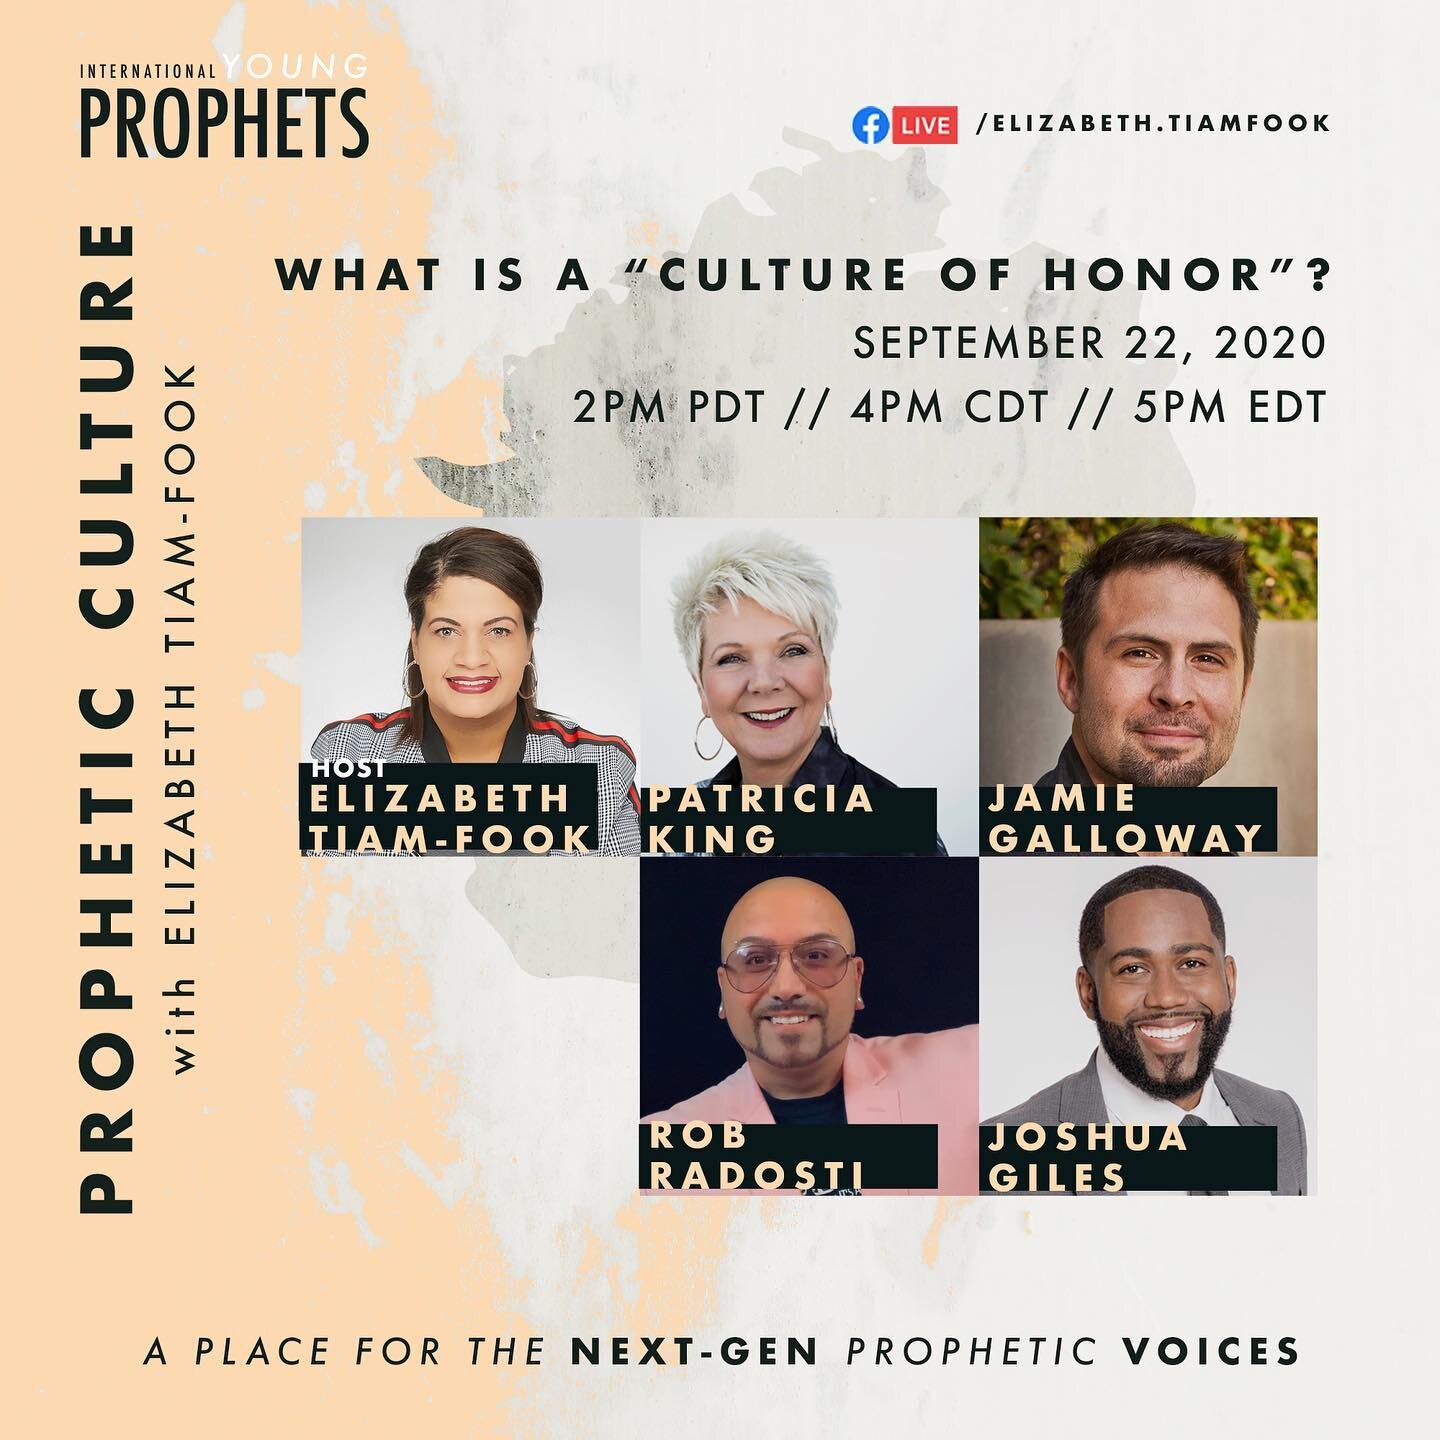 Next week.🔥🔥🔥🙌🏽
&ldquo;What is a Culture of Honor?&rdquo;
This will be a GREAT discussion.